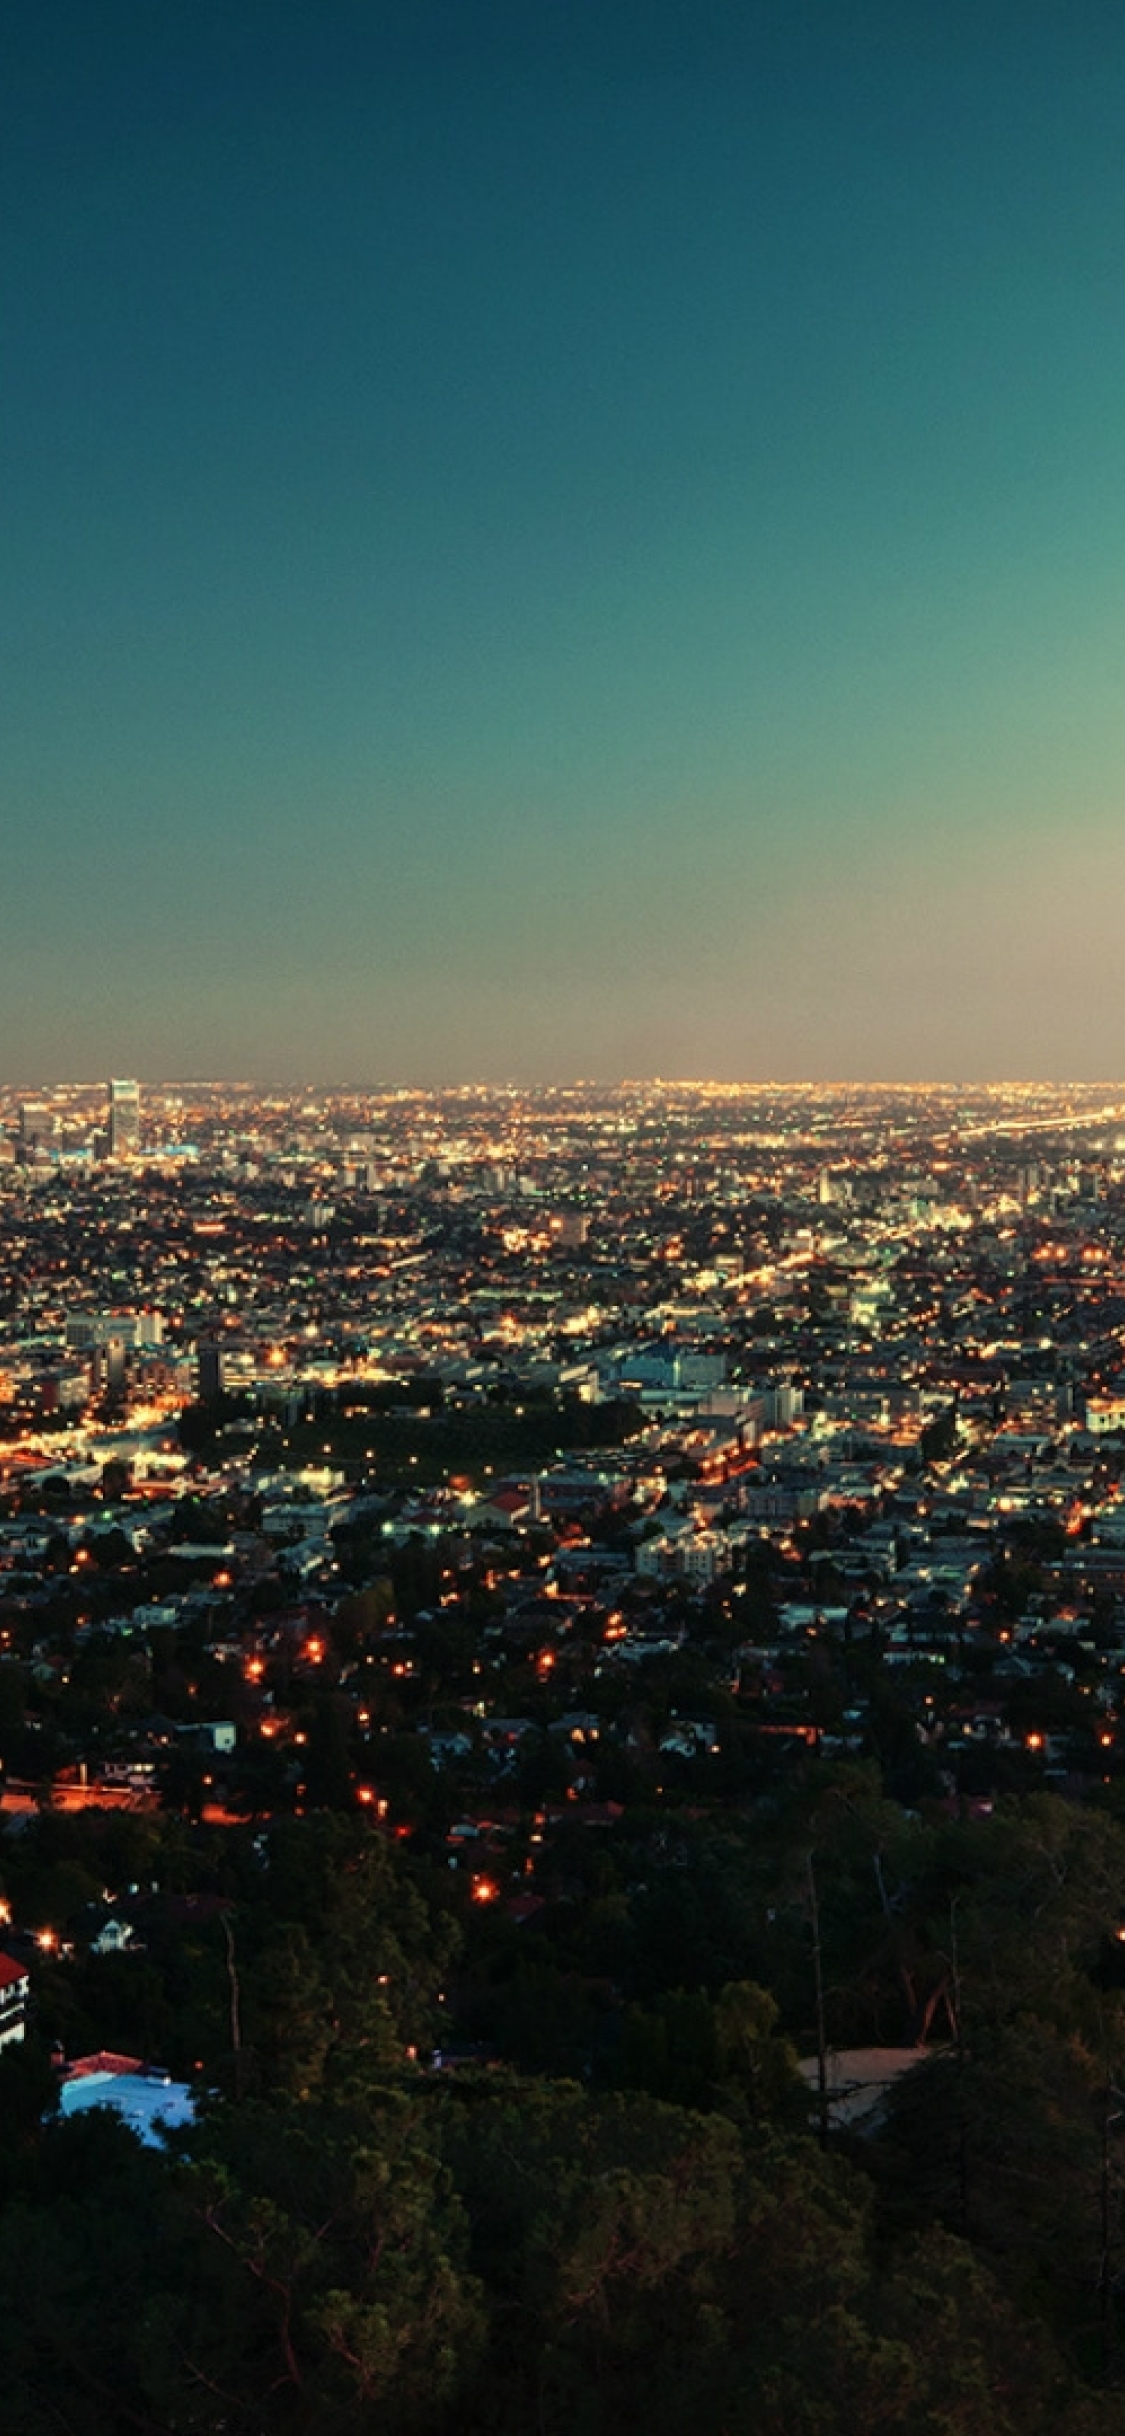 A night time cityscape of Los Angeles, California. - Los Angeles